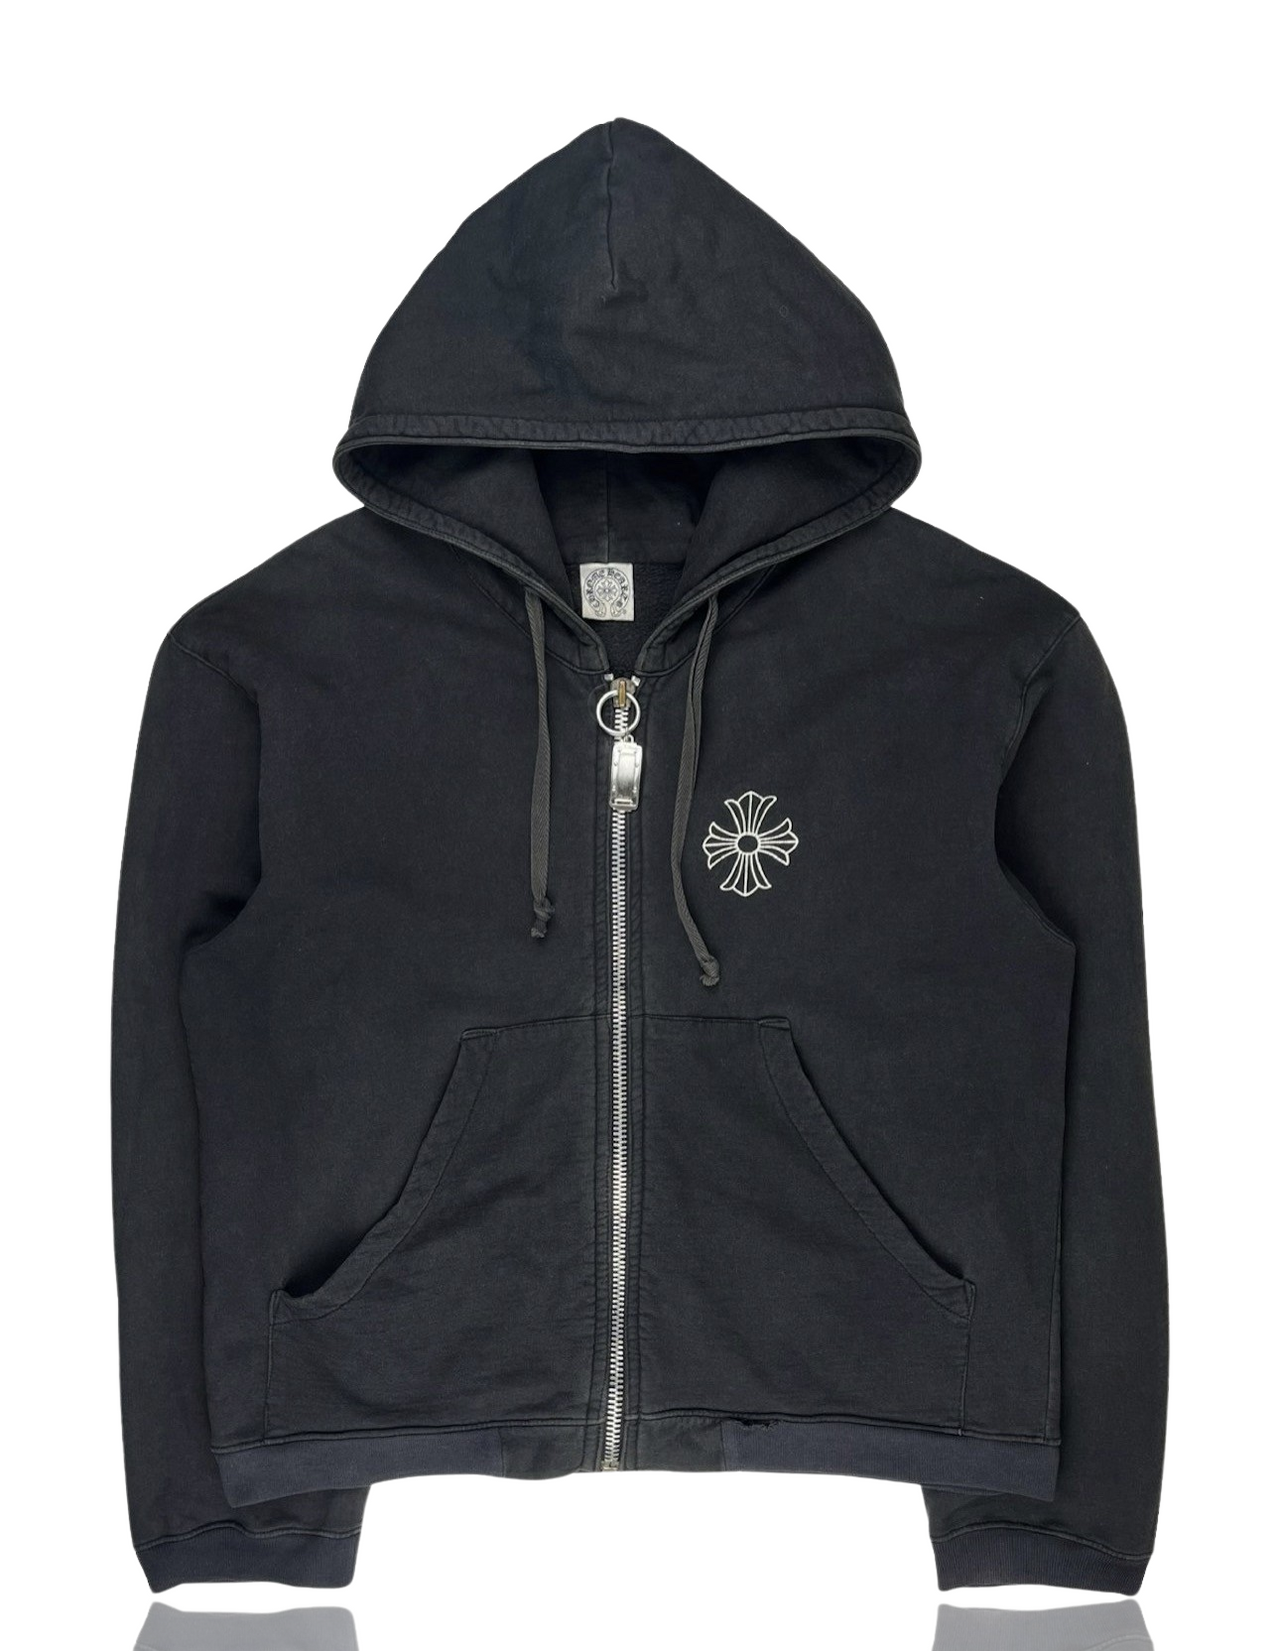 Chrome Hearts Floral Zip Up